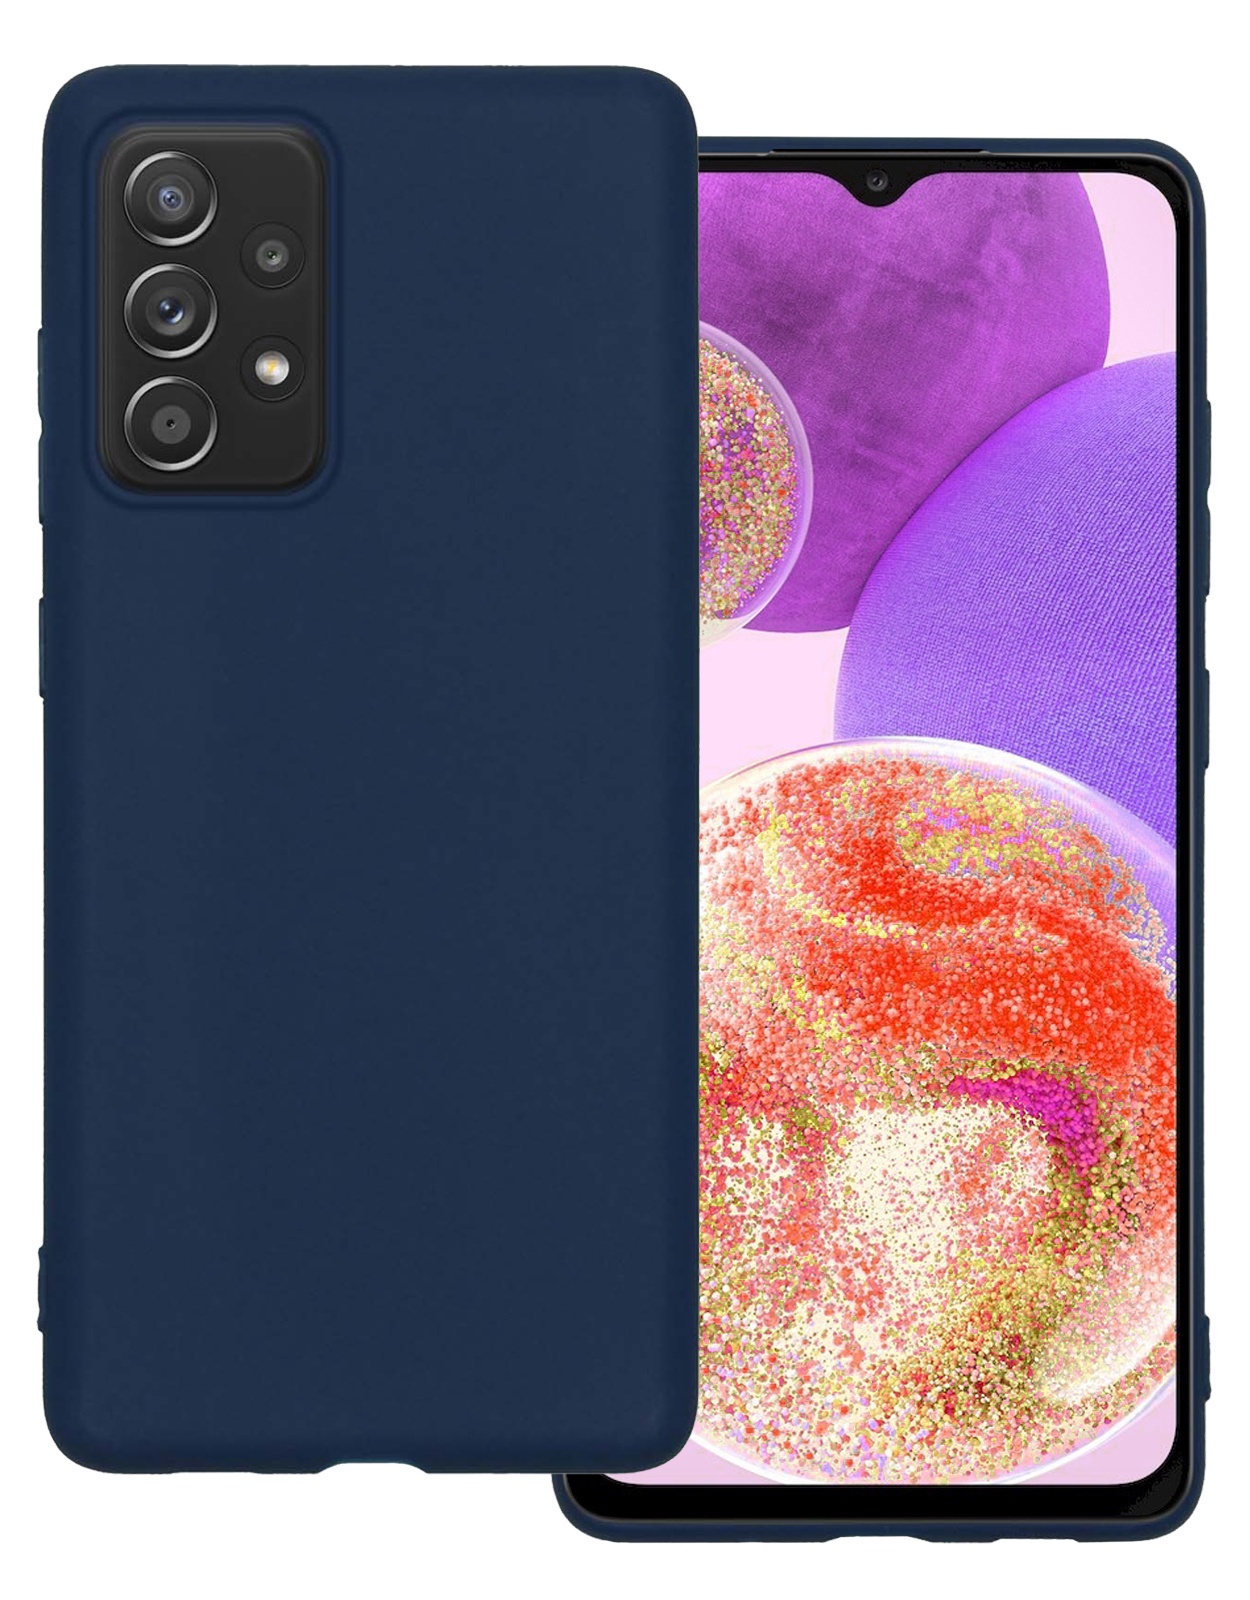 Hoes Geschikt voor Samsung A23 Hoesje Siliconen Back Cover Case - Hoesje Geschikt voor Samsung Galaxy A23 Hoes Cover Hoesje - Donkerblauw